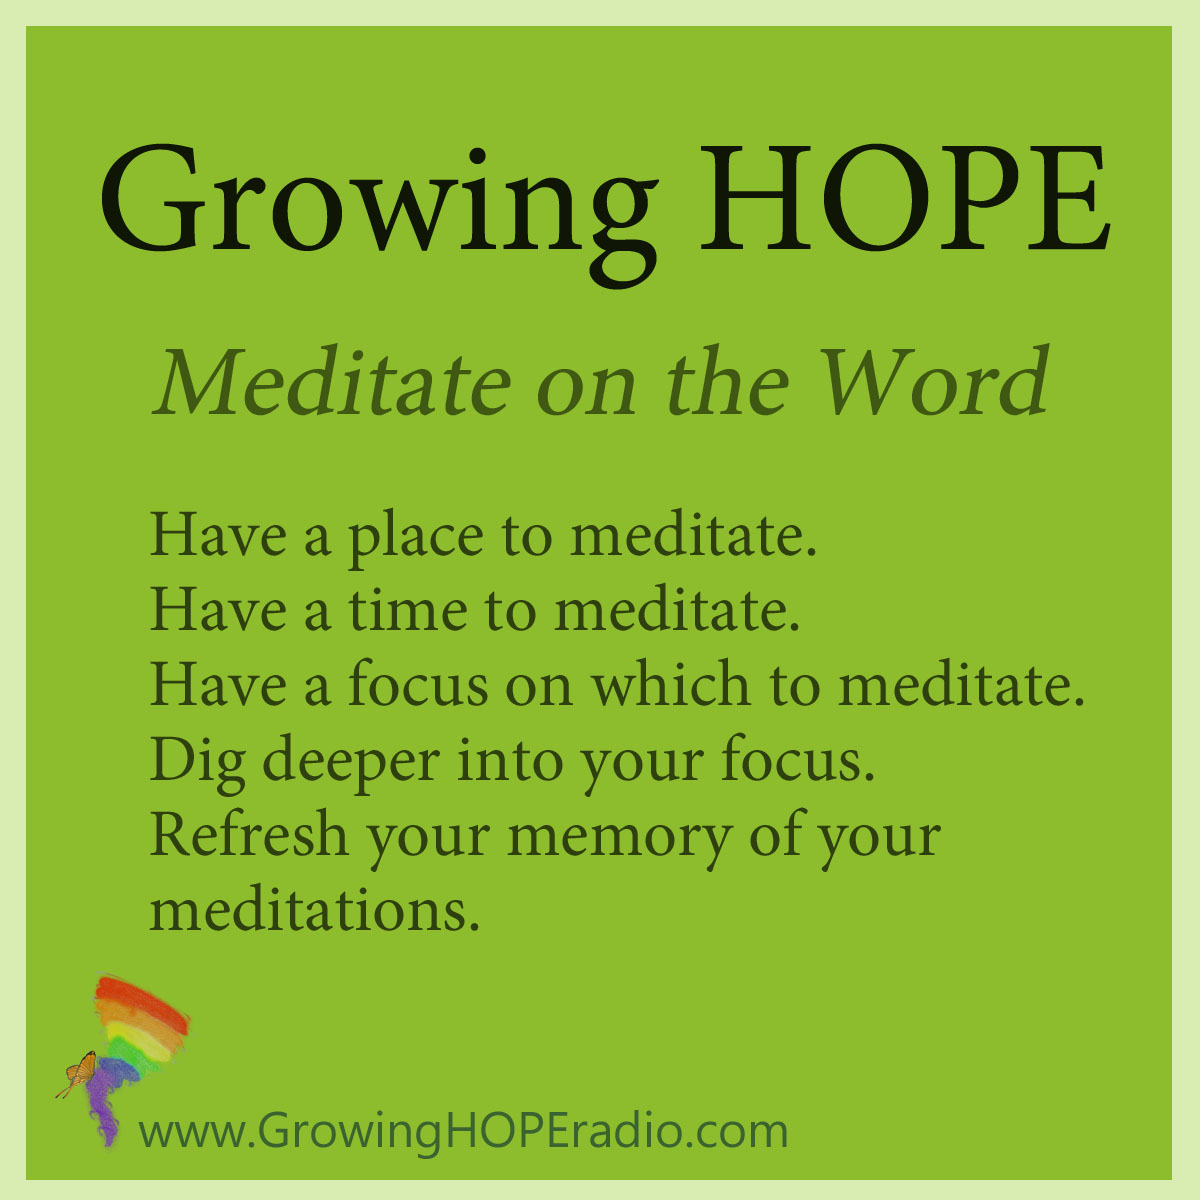 #GrowingHOPE - 5 points - meditate on the word